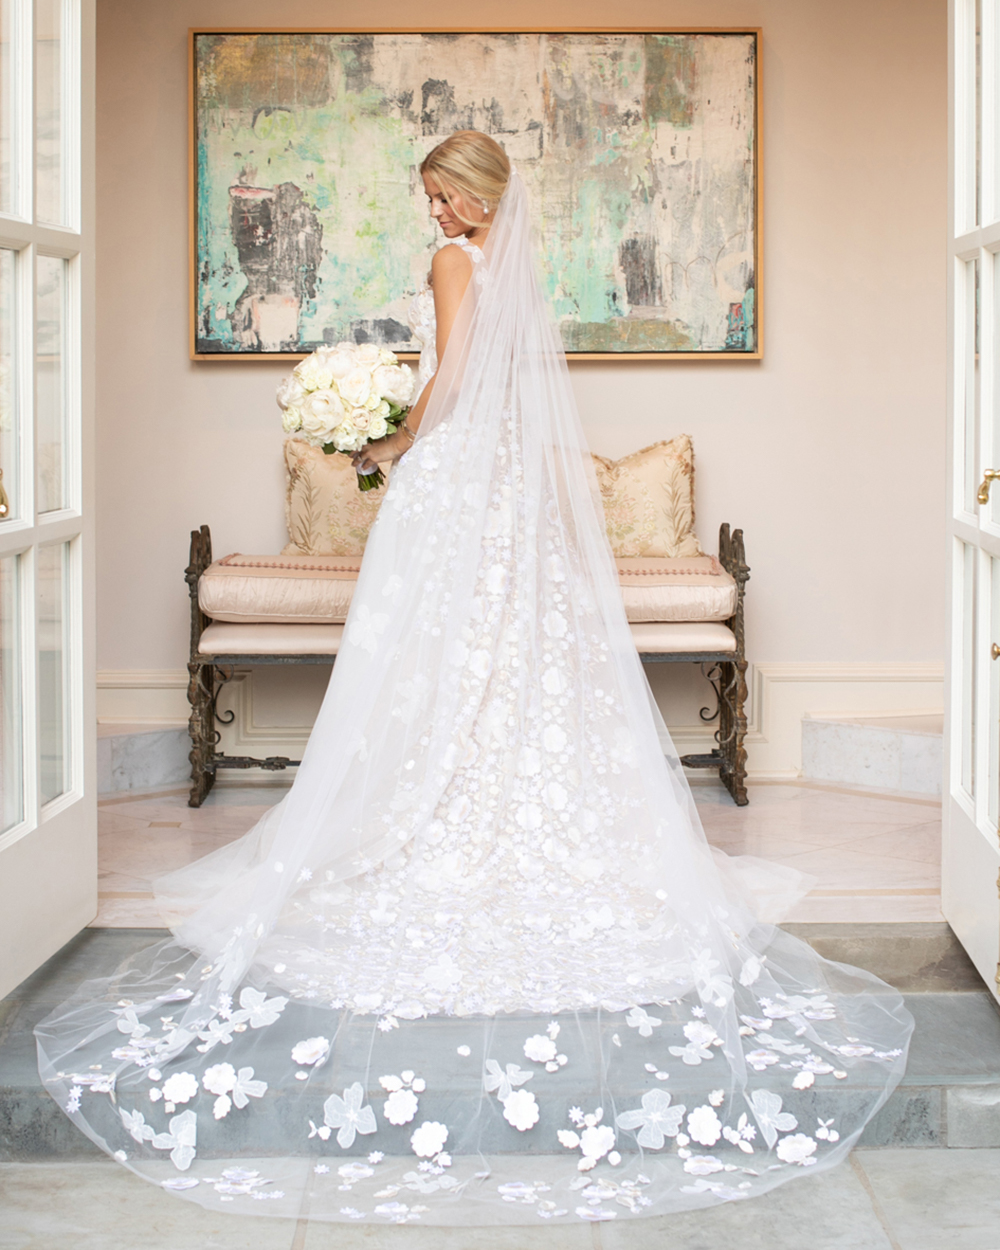 Griffin Young’s Bridal Portraits at Home